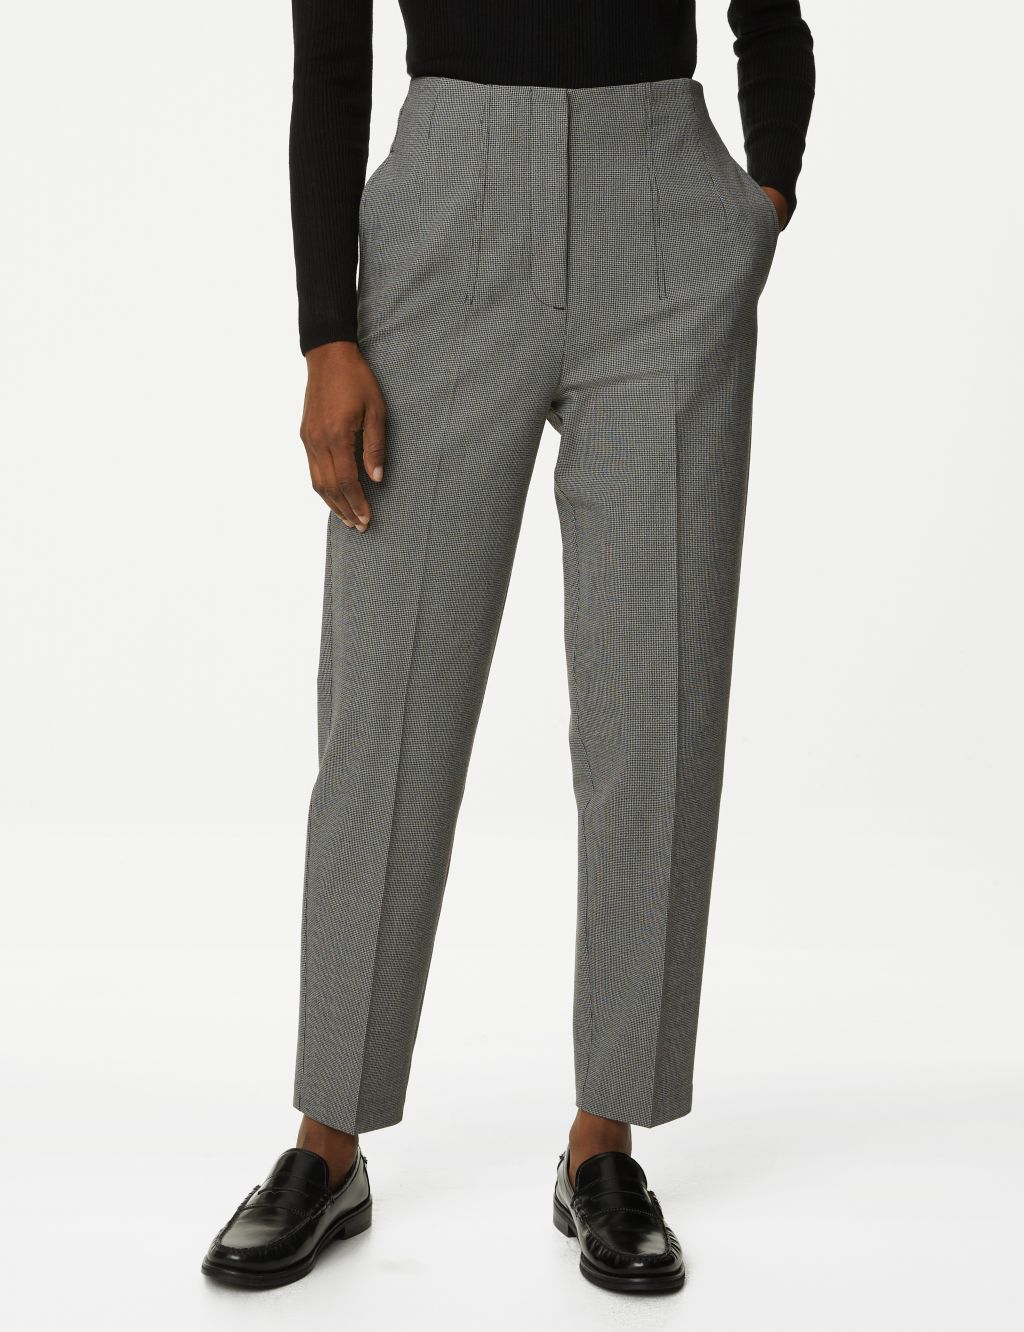 Checked Tapered Ankle Grazer Trousers image 4